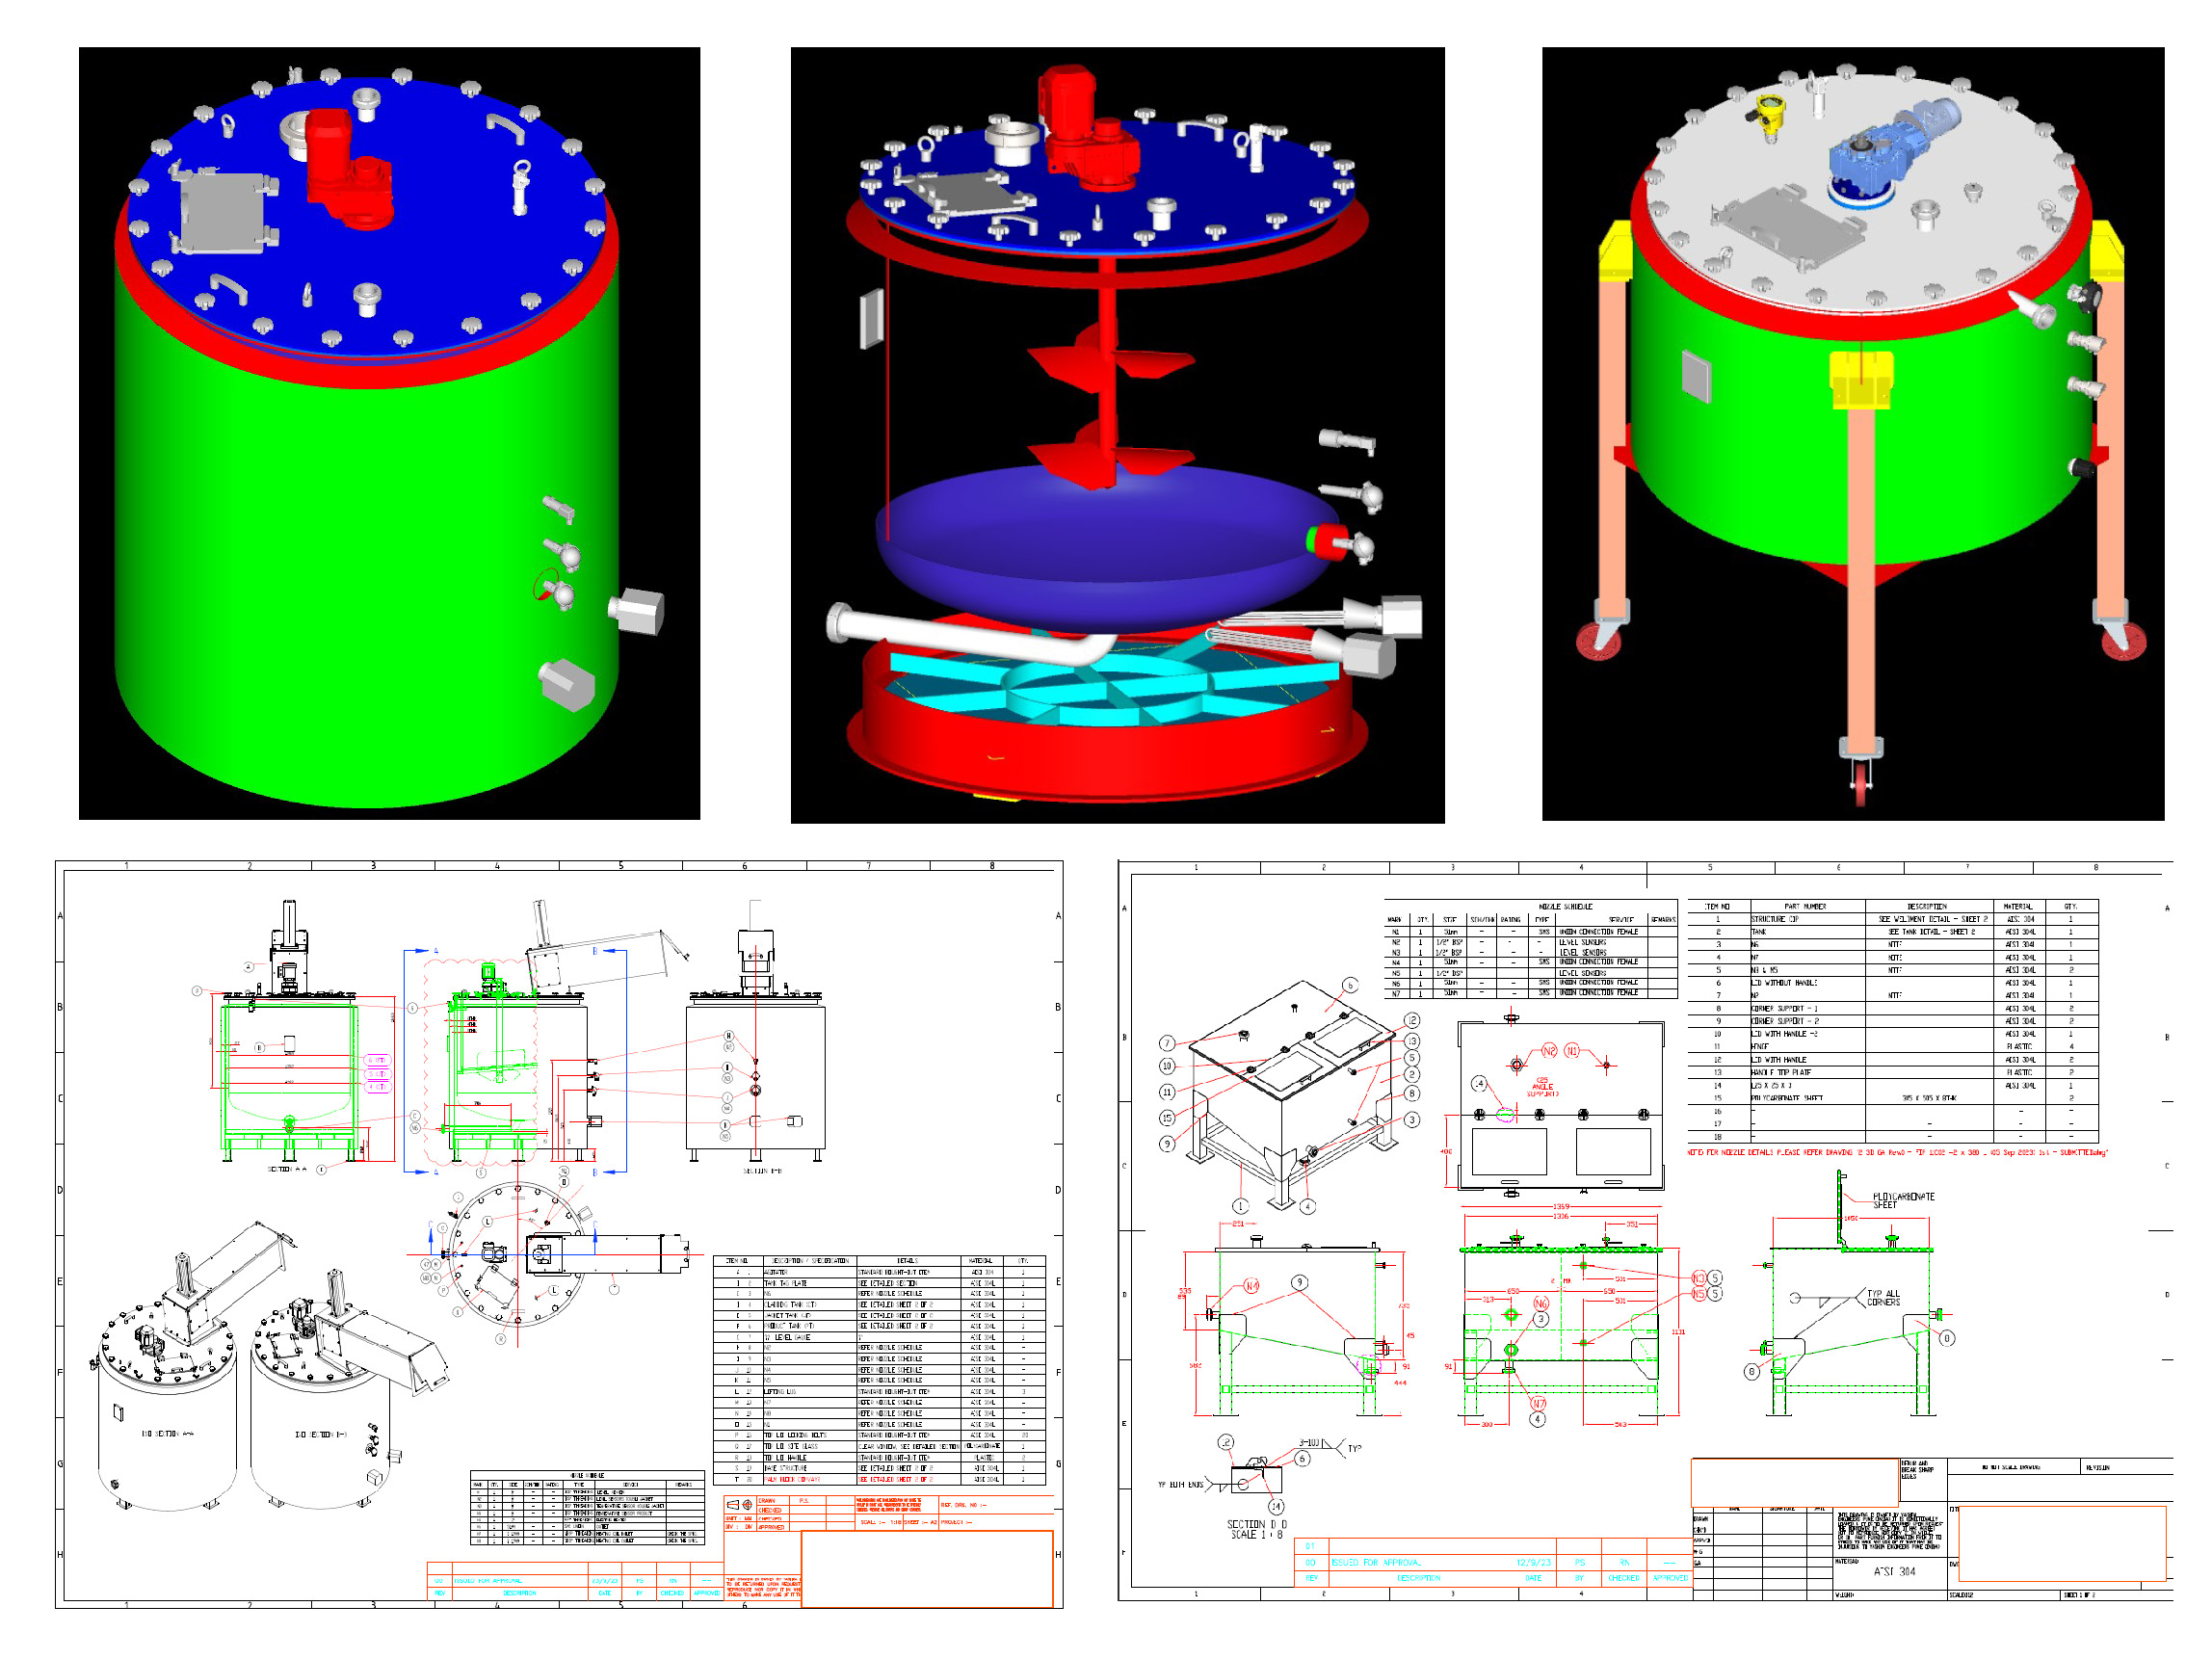 3D & 2D Food & Process plant Tanks and Equipments